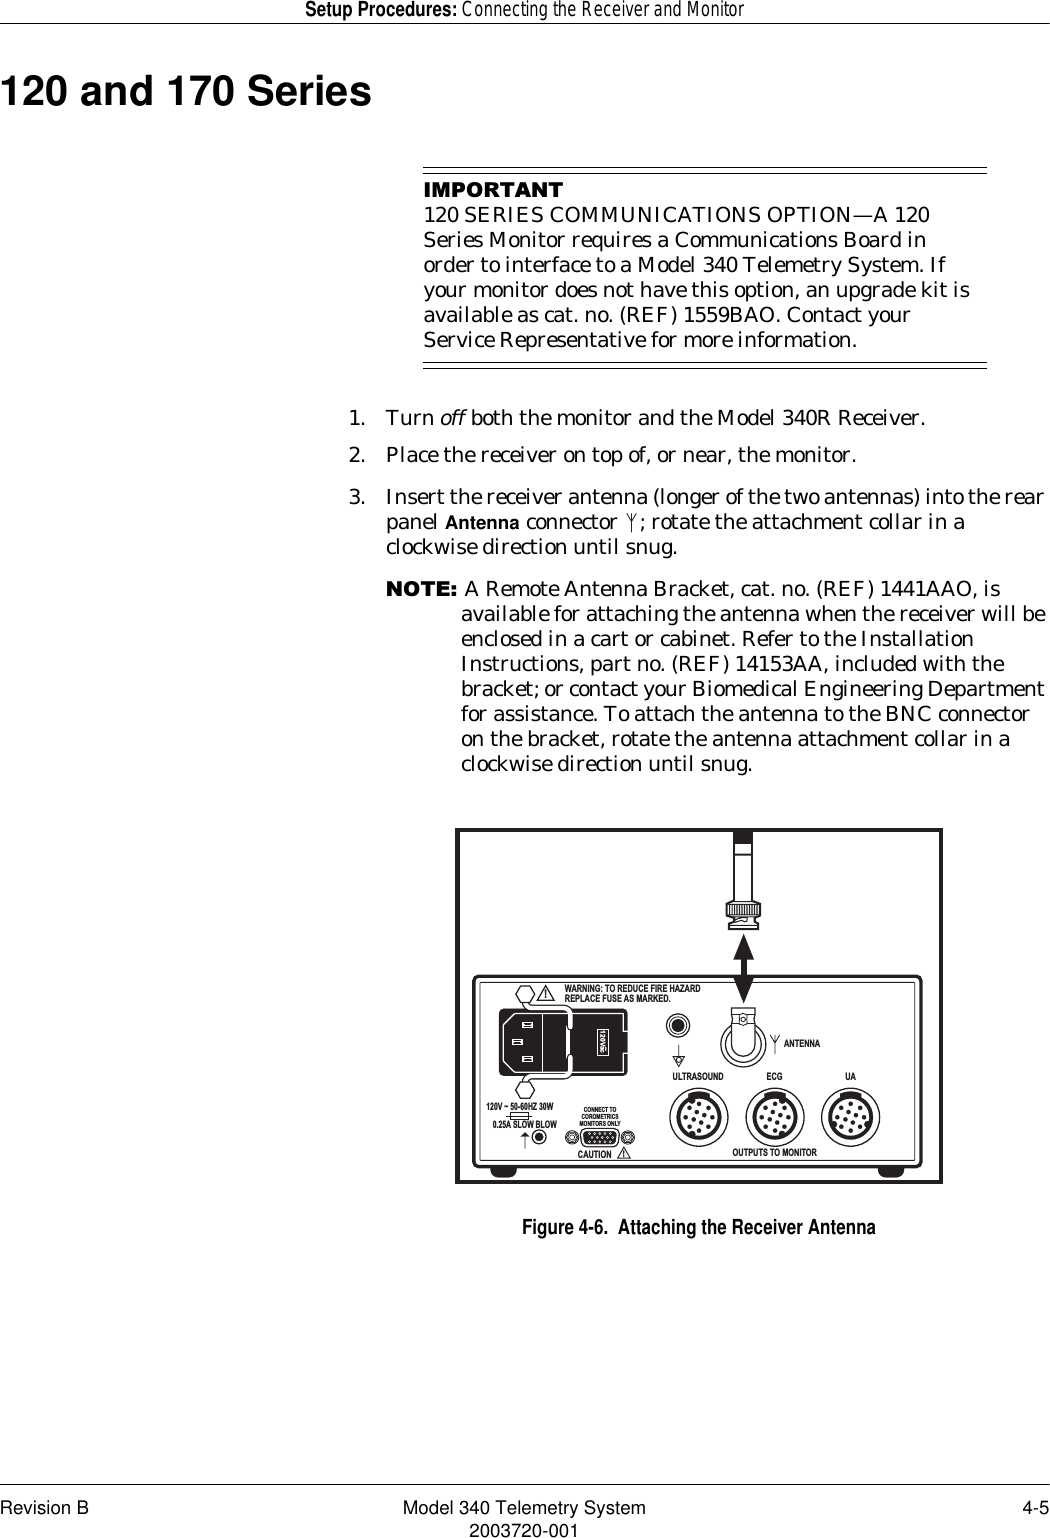 Revision B Model 340 Telemetry System 4-52003720-001Setup Procedures: Connecting the Receiver and Monitor120 and 170 Series,03257$17120 SERIES COMMUNICATIONS OPTION—A 120 Series Monitor requires a Communications Board in order to interface to a Model 340 Telemetry System. If your monitor does not have this option, an upgrade kit is available as cat. no. (REF) 1559BAO. Contact your Service Representative for more information.1. Turn off both the monitor and the Model 340R Receiver.2. Place the receiver on top of, or near, the monitor.3. Insert the receiver antenna (longer of the two antennas) into the rear panel Antenna connector  ; rotate the attachment collar in a clockwise direction until snug.127(A Remote Antenna Bracket, cat. no. (REF) 1441AAO, is available for attaching the antenna when the receiver will be enclosed in a cart or cabinet. Refer to the Installation Instructions, part no. (REF) 14153AA, included with the bracket; or contact your Biomedical Engineering Department for assistance. To attach the antenna to the BNC connector on the bracket, rotate the antenna attachment collar in a clockwise direction until snug.Figure 4-6.  Attaching the Receiver AntennaANTENNAOUTPUTS TO MONITORCONNECT TOCOROMETRICSMONITORS ONLYULTRASOUND ECG UA!WARNING: TO REDUCE FIRE HAZARDREPLACE FUSE AS MARKED.CAUTION!120Vac~120V ~ 50-60HZ 30W0.25A SLOW BLOW